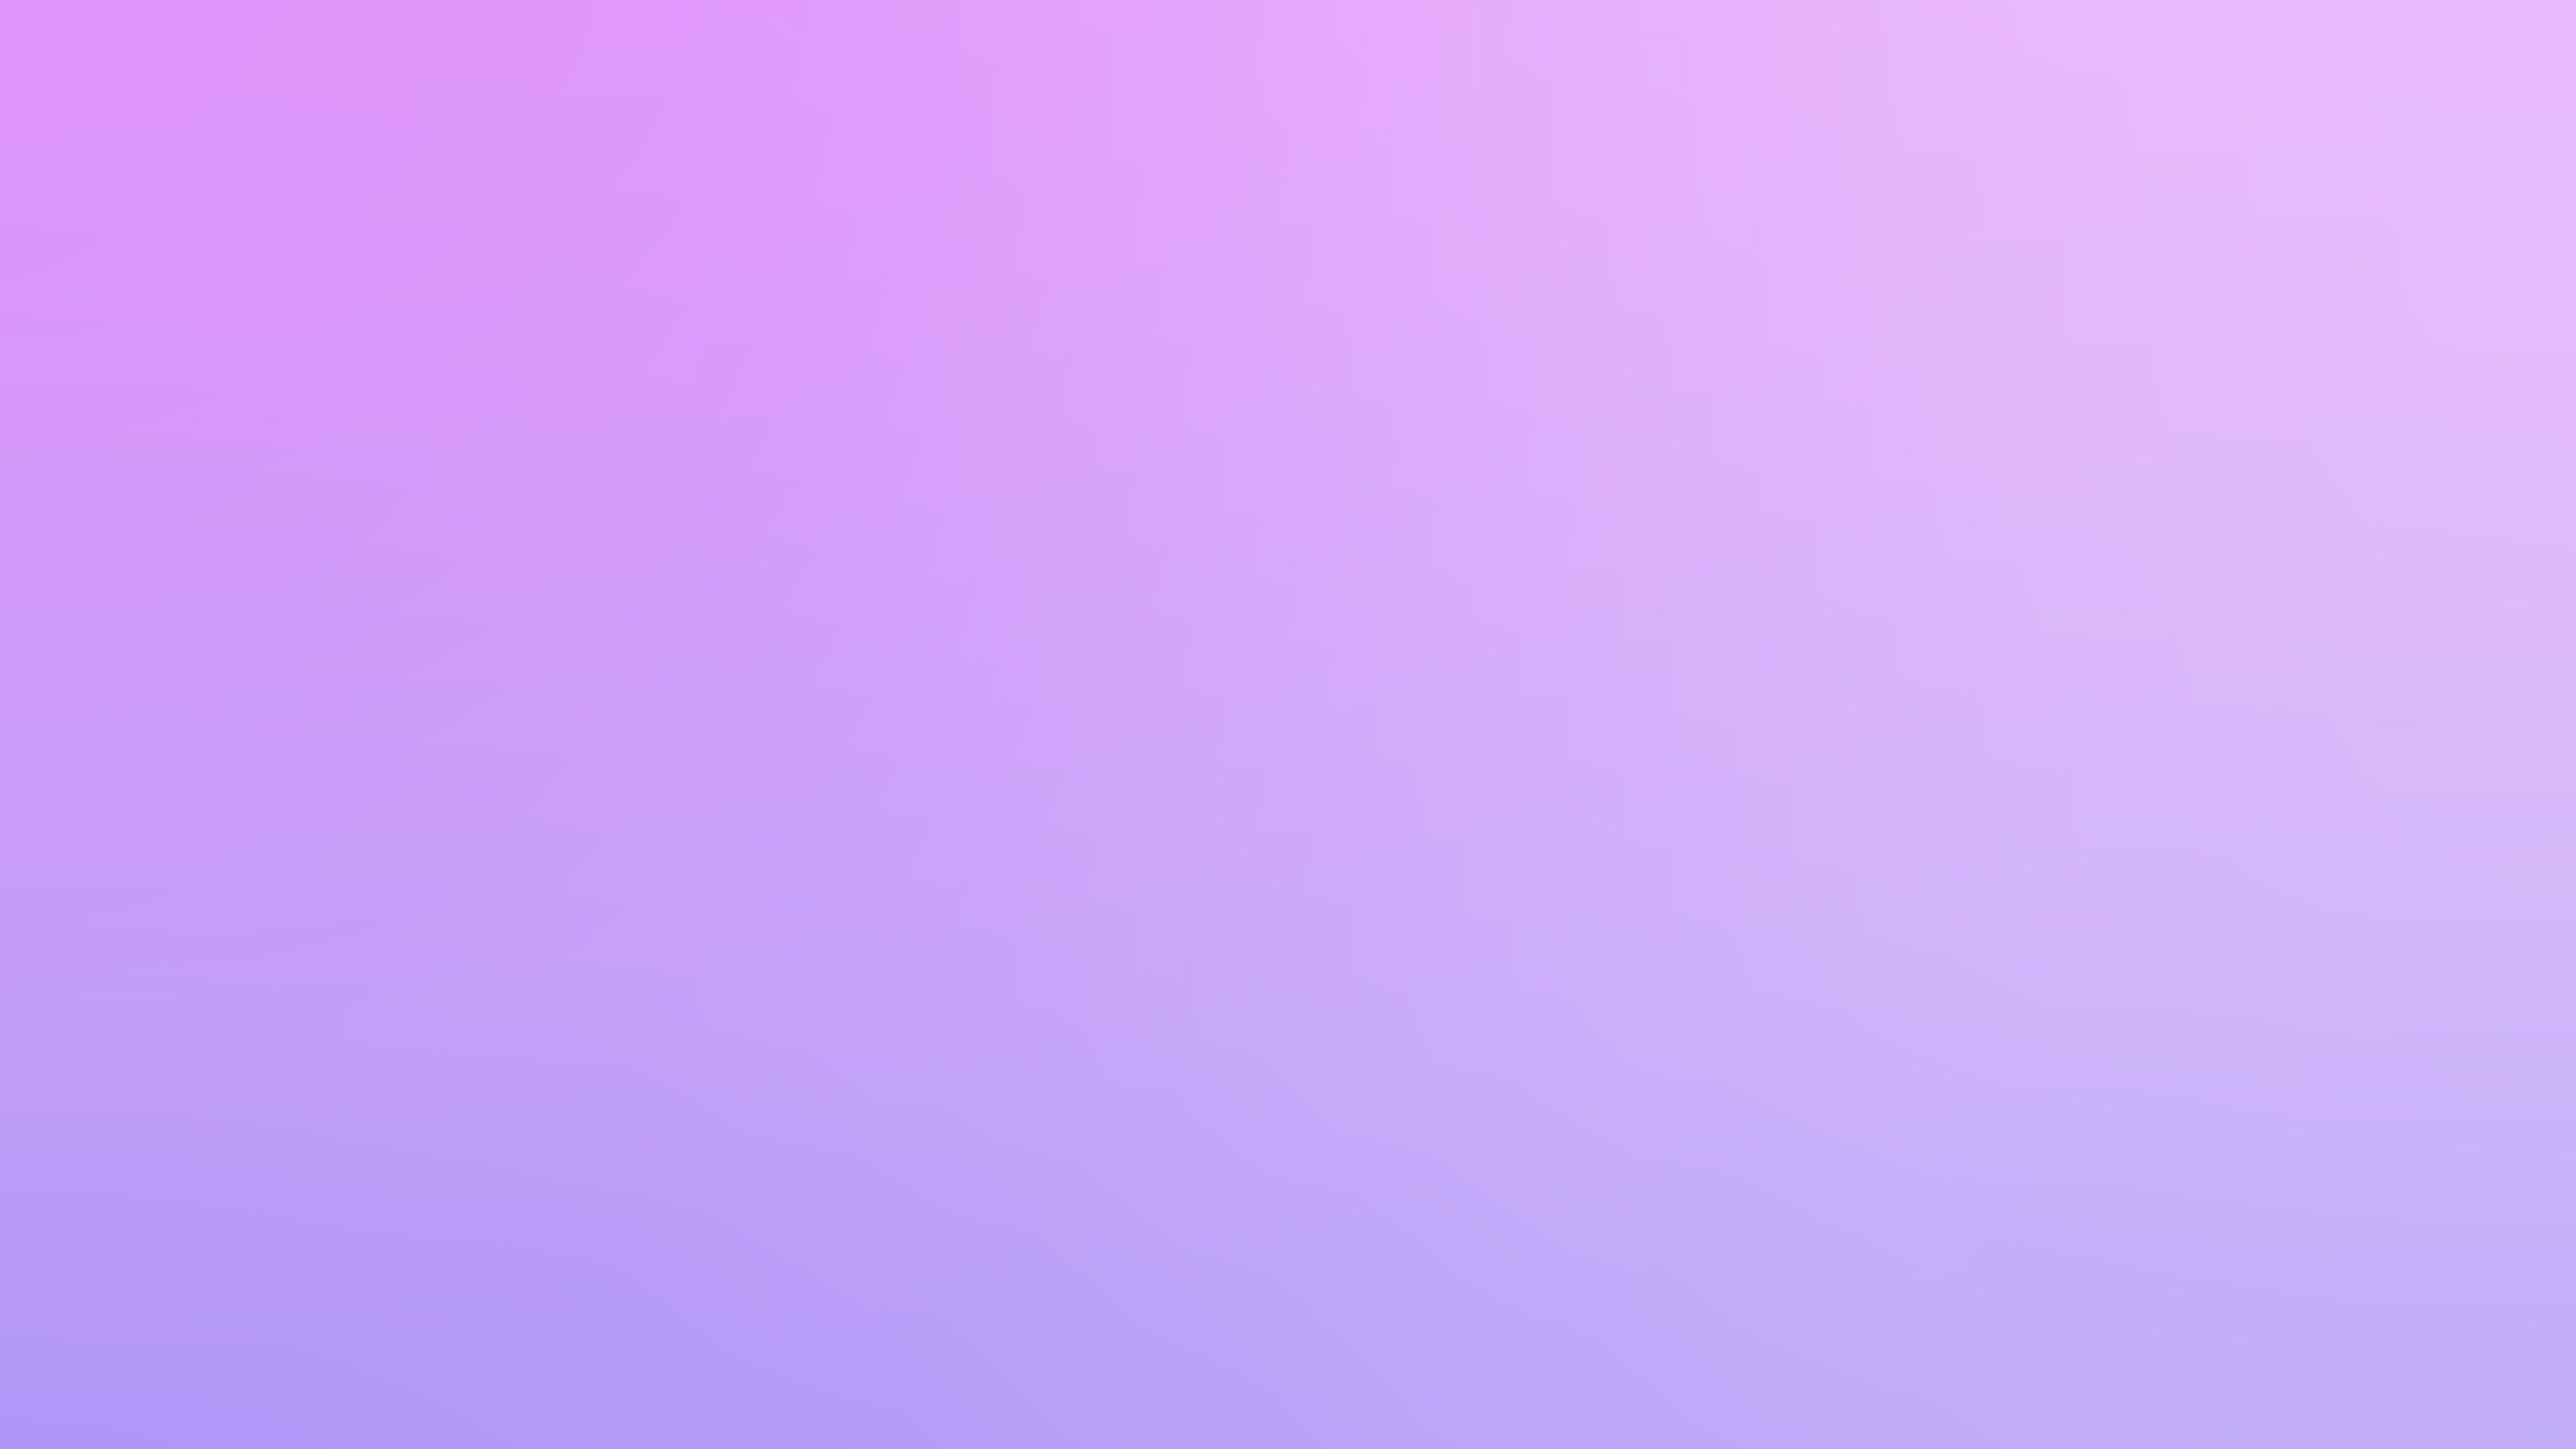 A purple and pink background with white text - Light purple